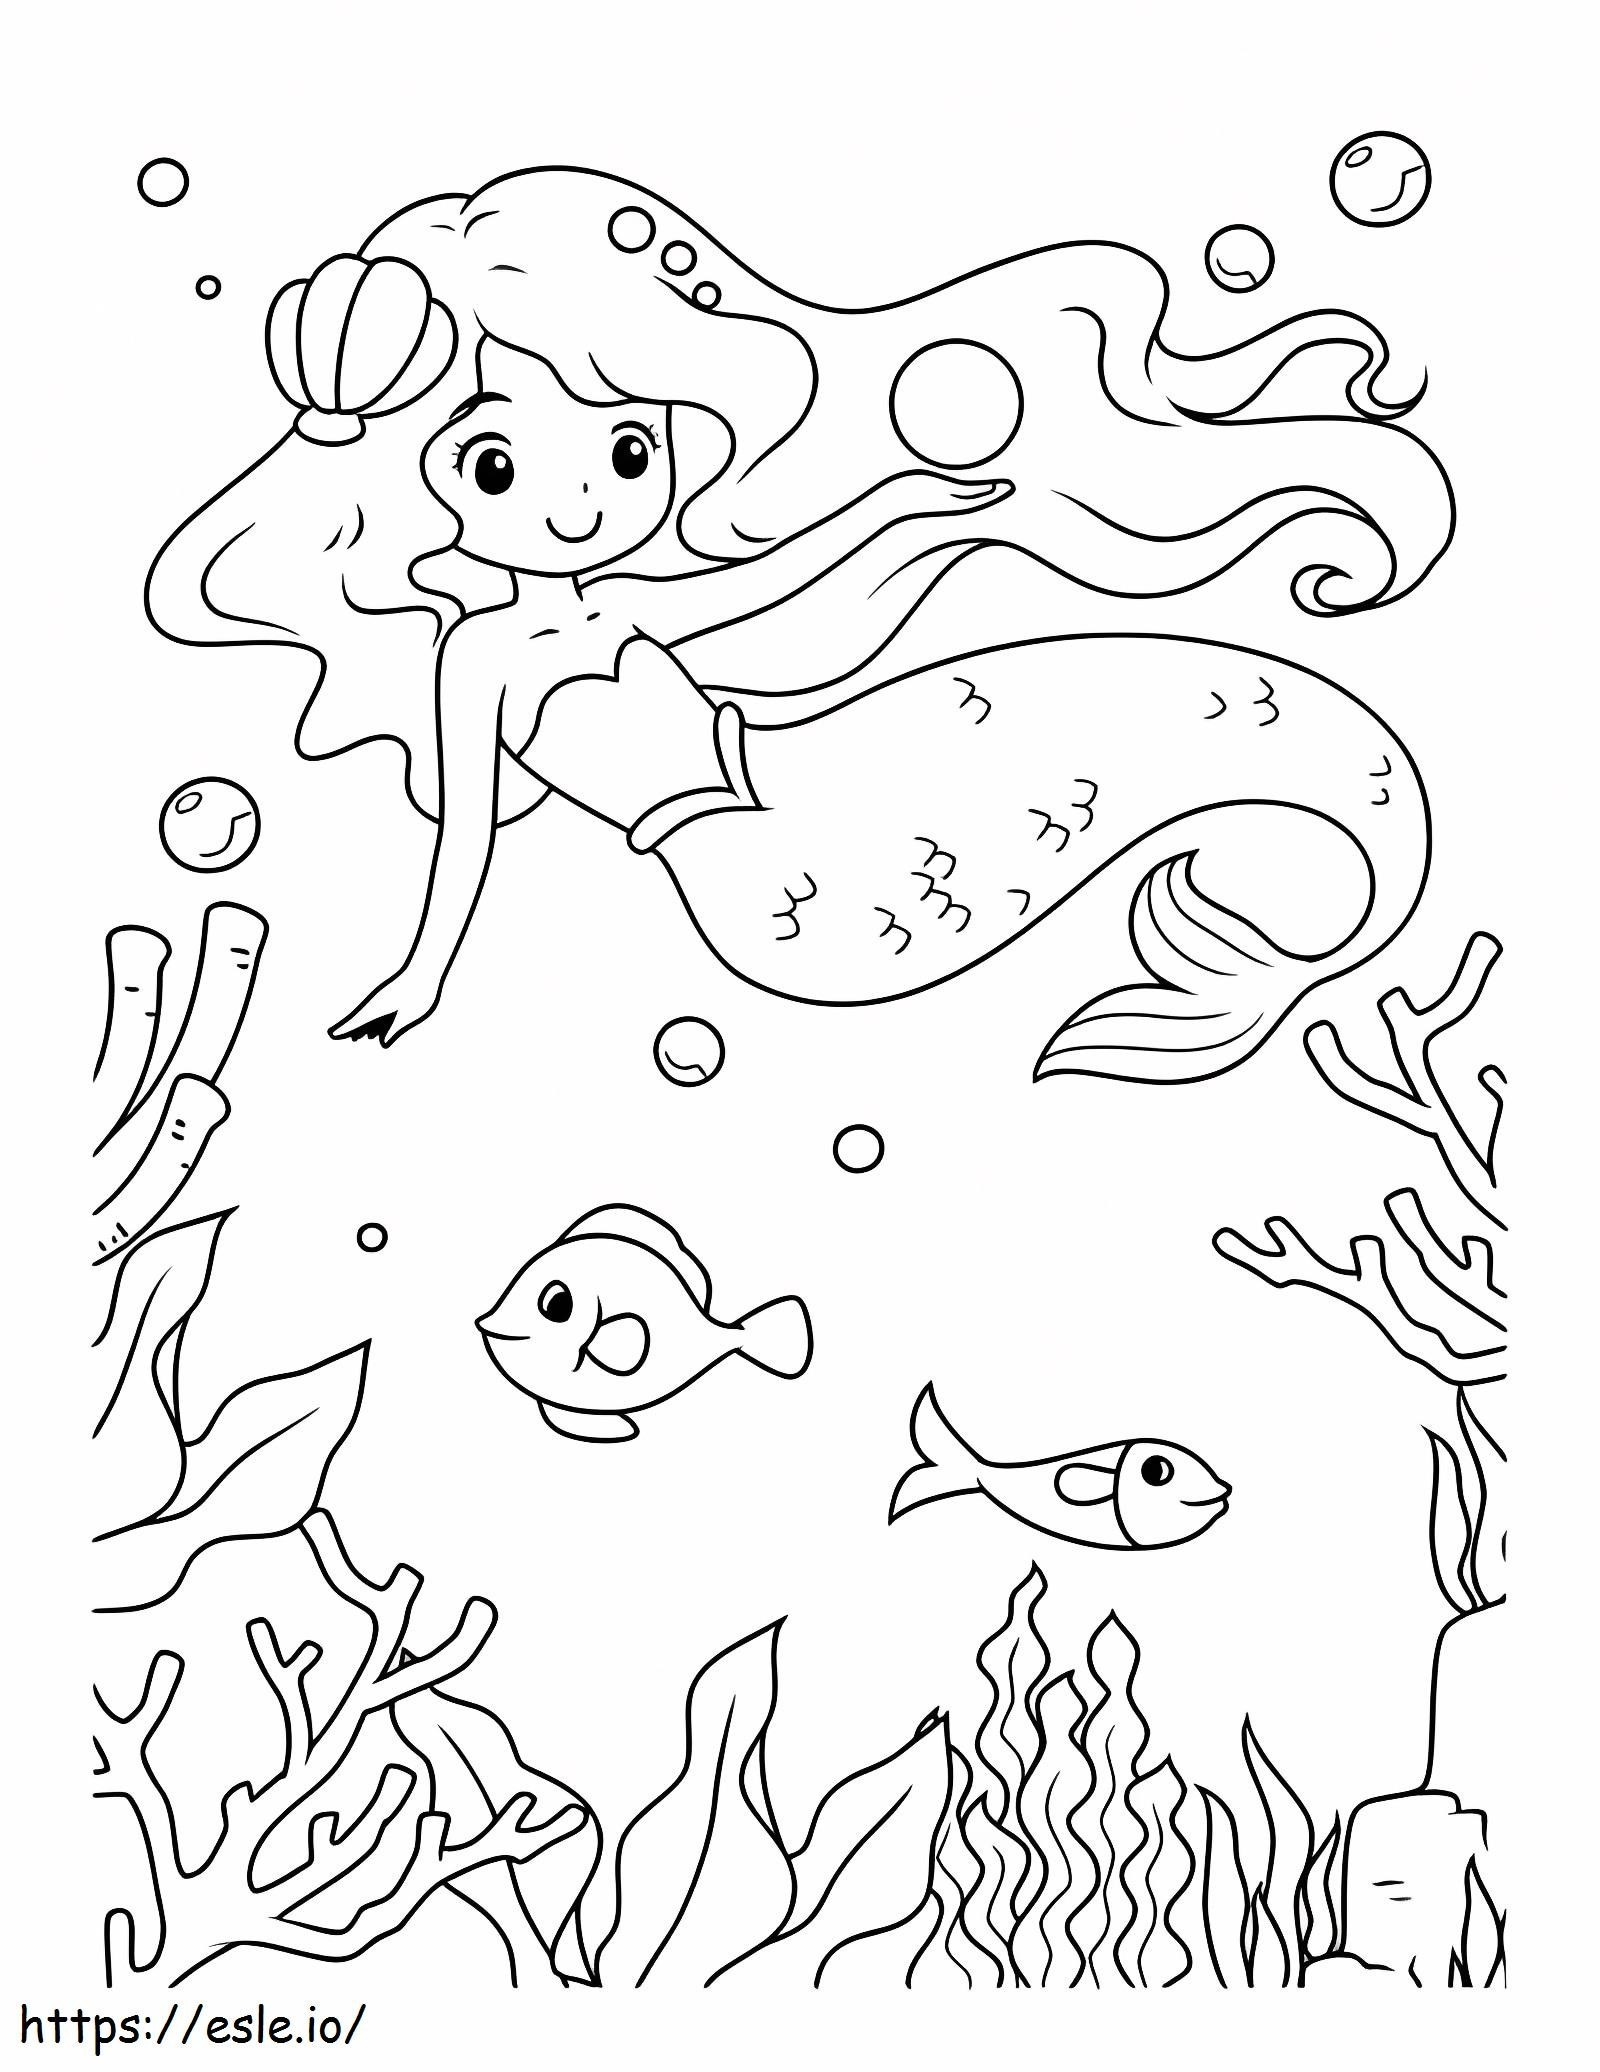 Mermaid Swimming coloring page